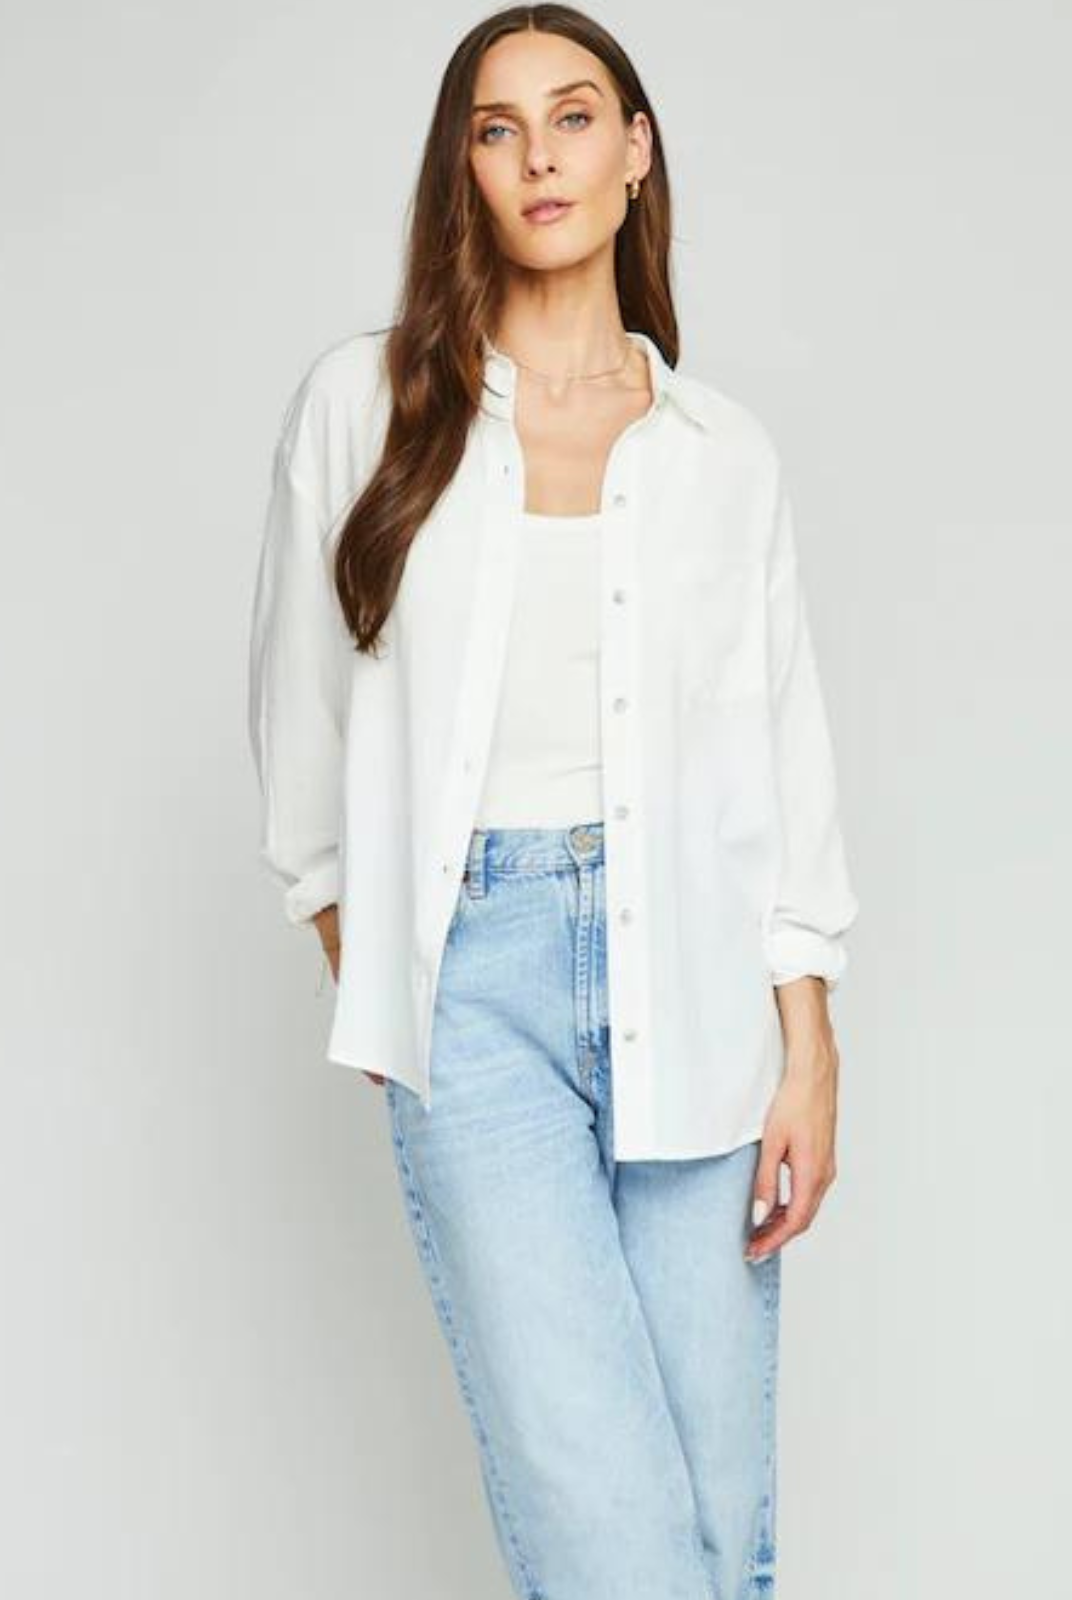 Gentle Fawn Hudson Button Down Shirt. The perfect top for everything - wear it open, closed, tucked in, tied up, sleeves down, sleeves rolled, wear it with shorts, pants, leggings, or as a swimsuit cover up! This little beauty will be your new best friend.